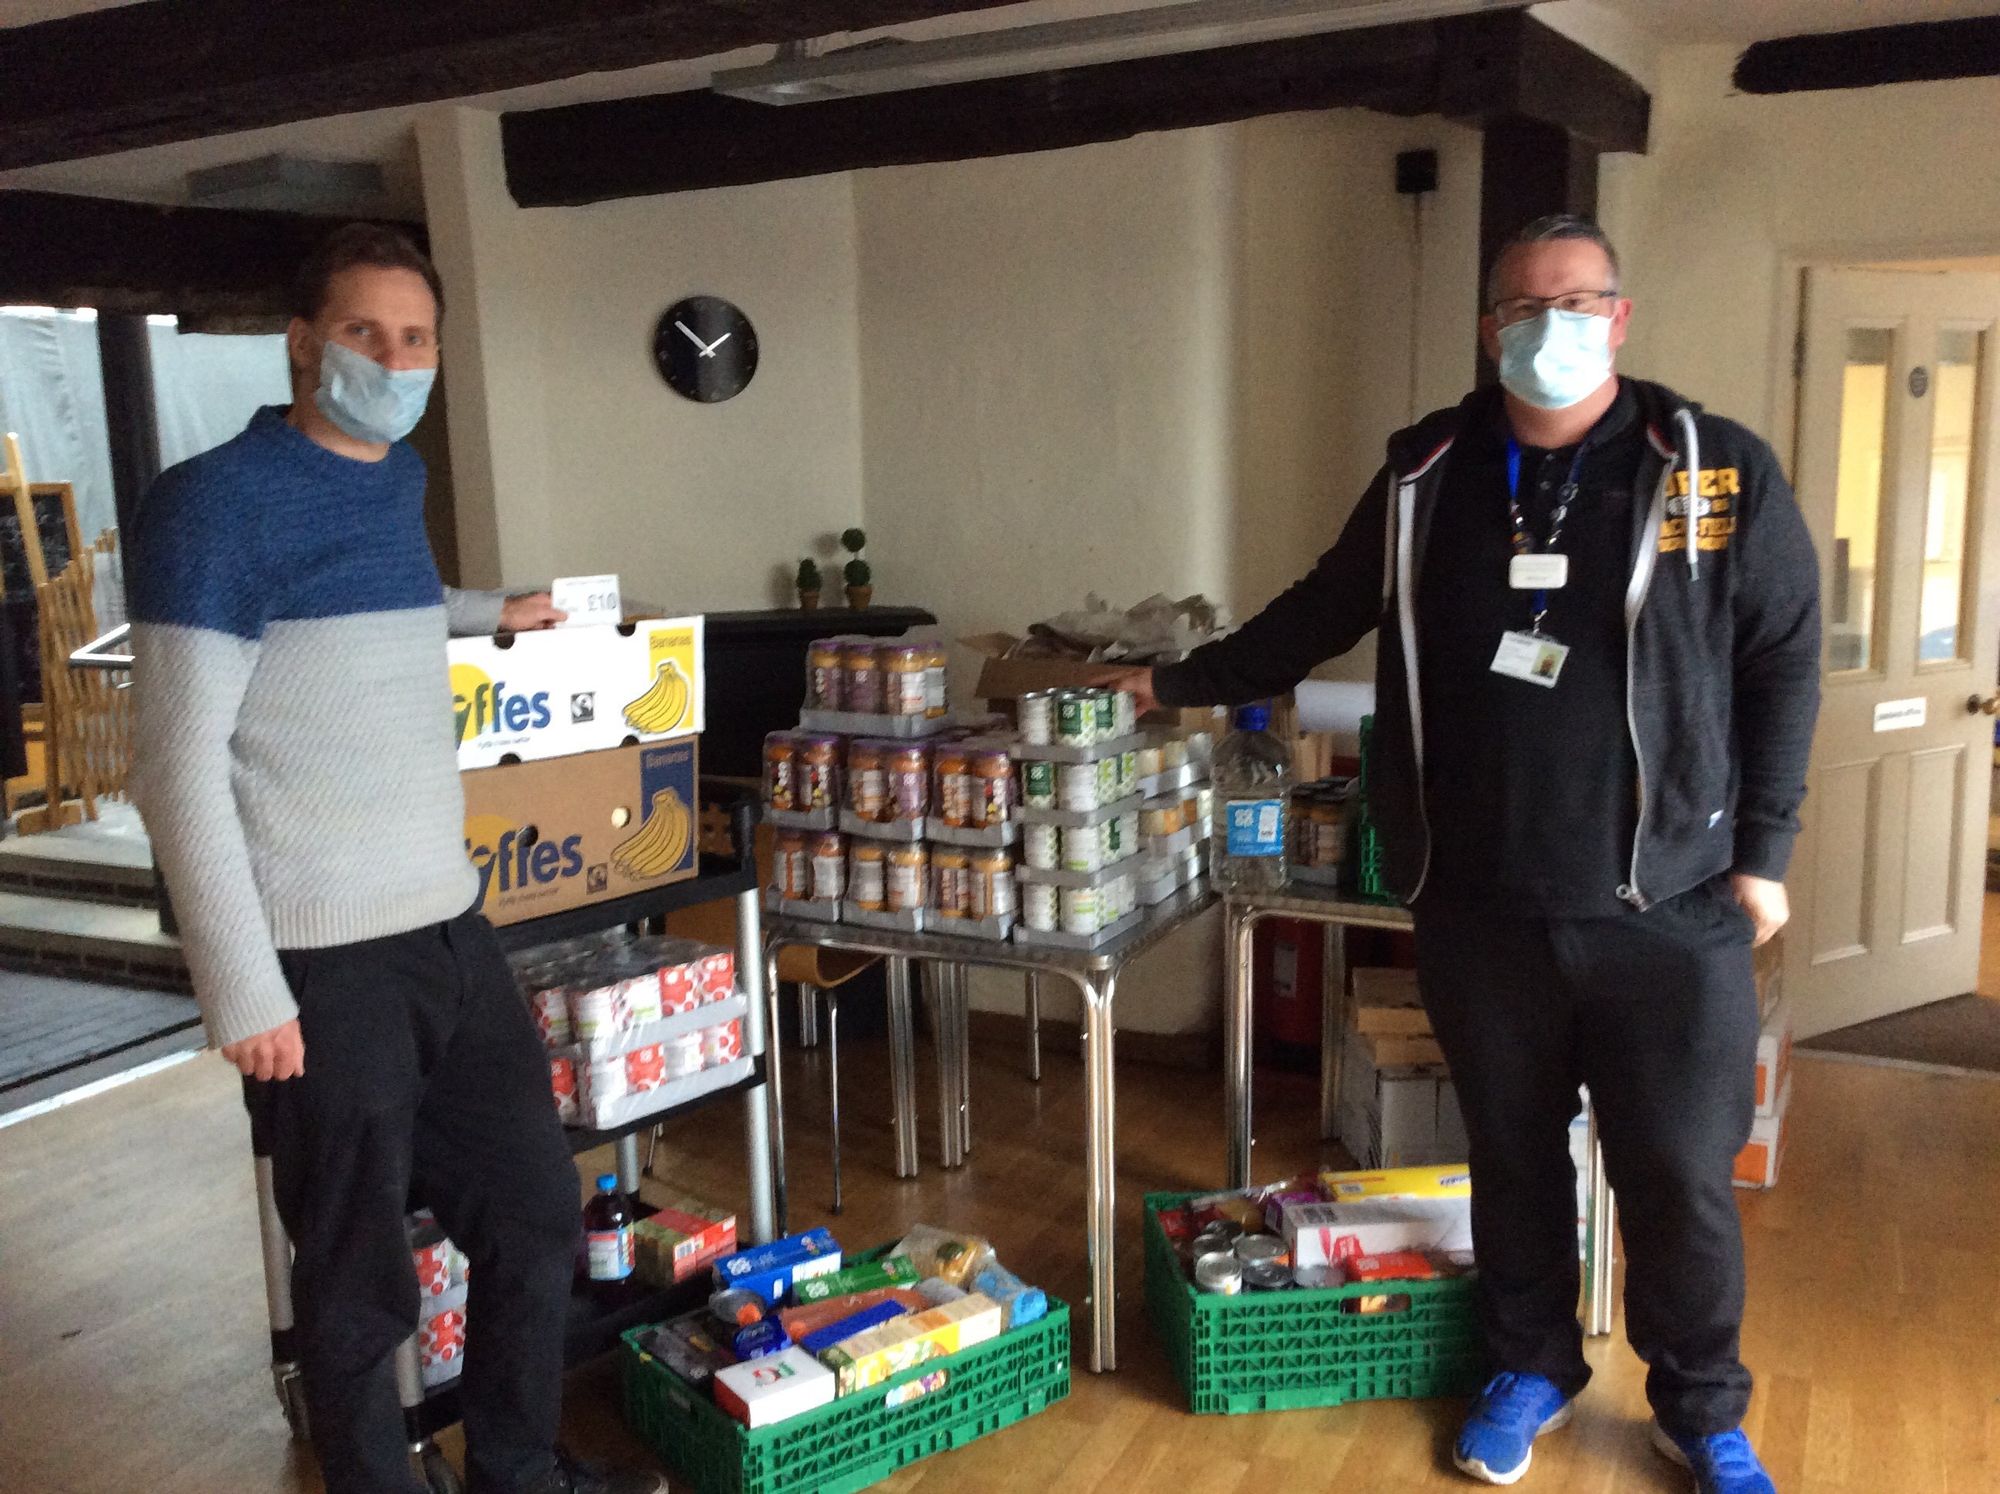 Membership and Community Council helps support local Foodbank